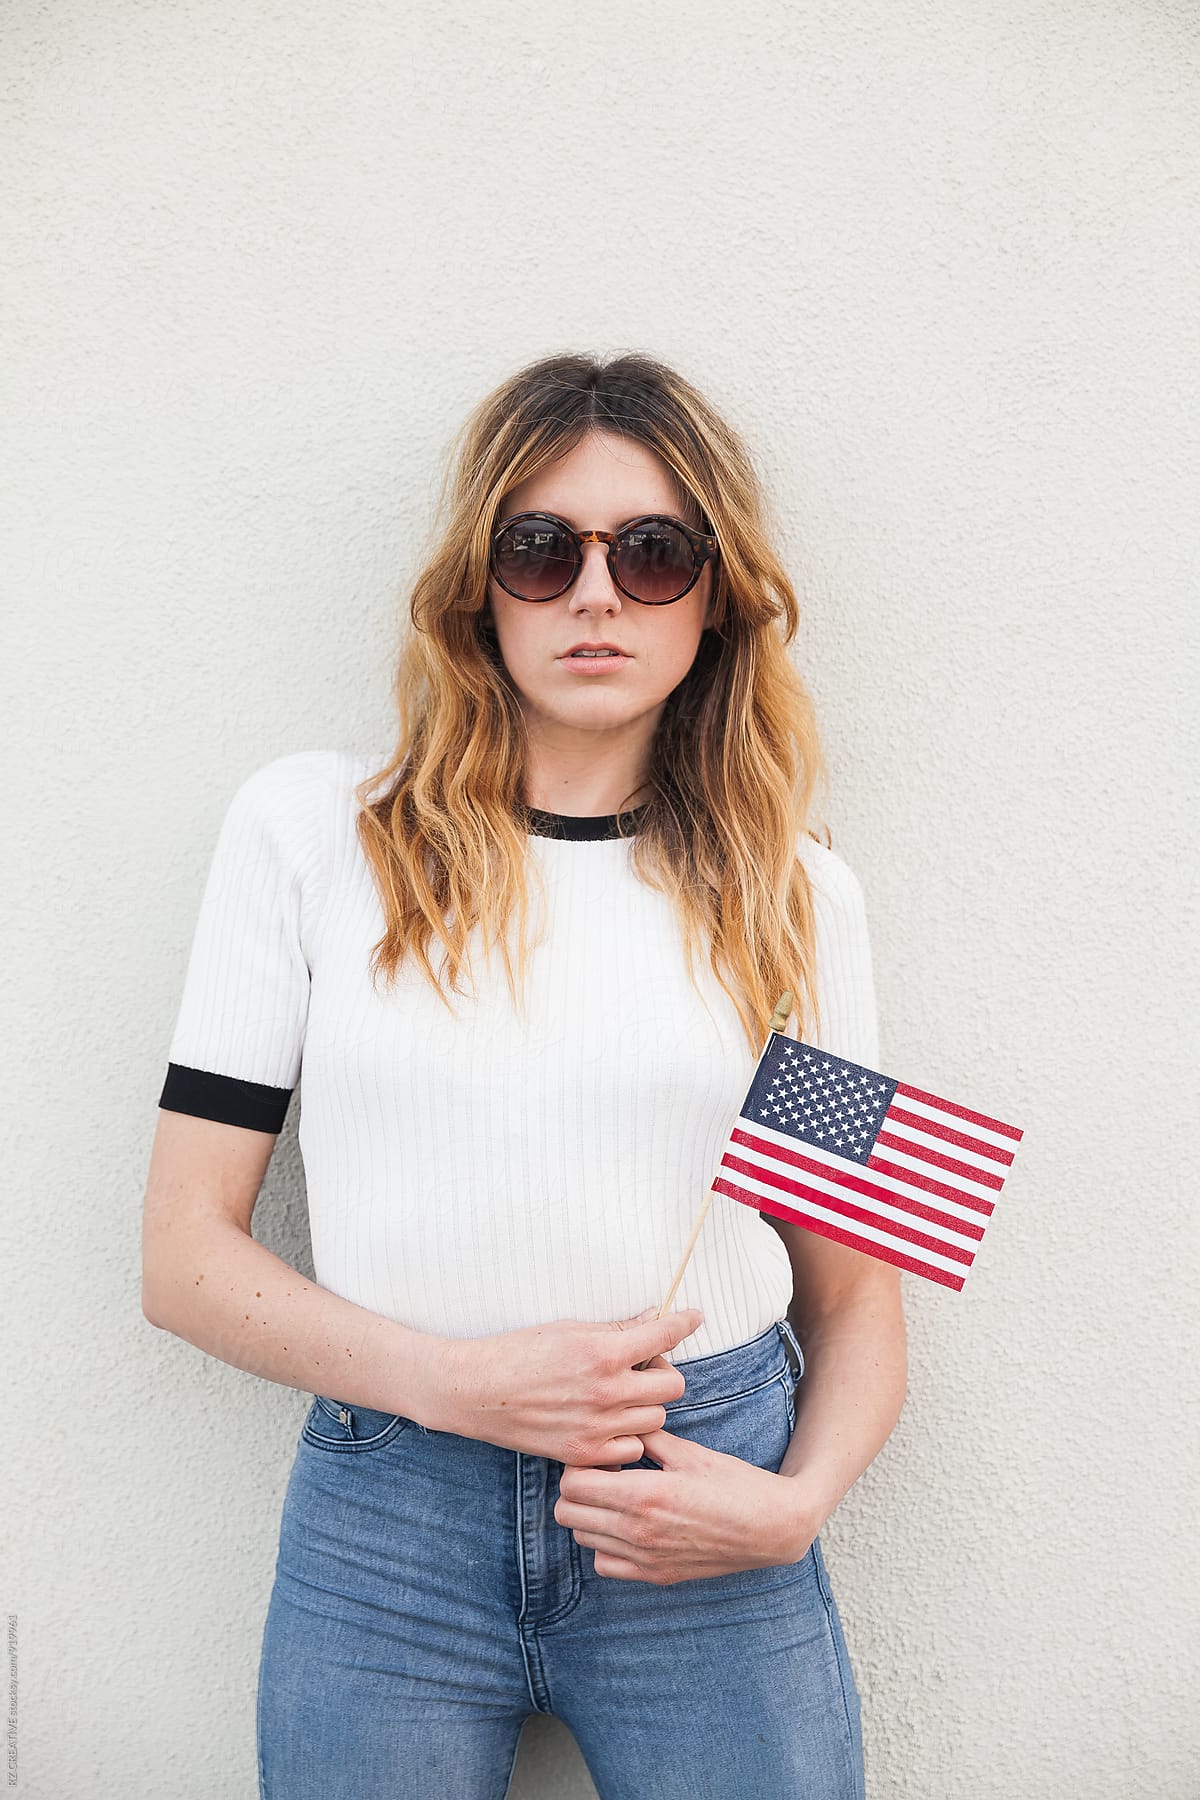 Woman with American flag.